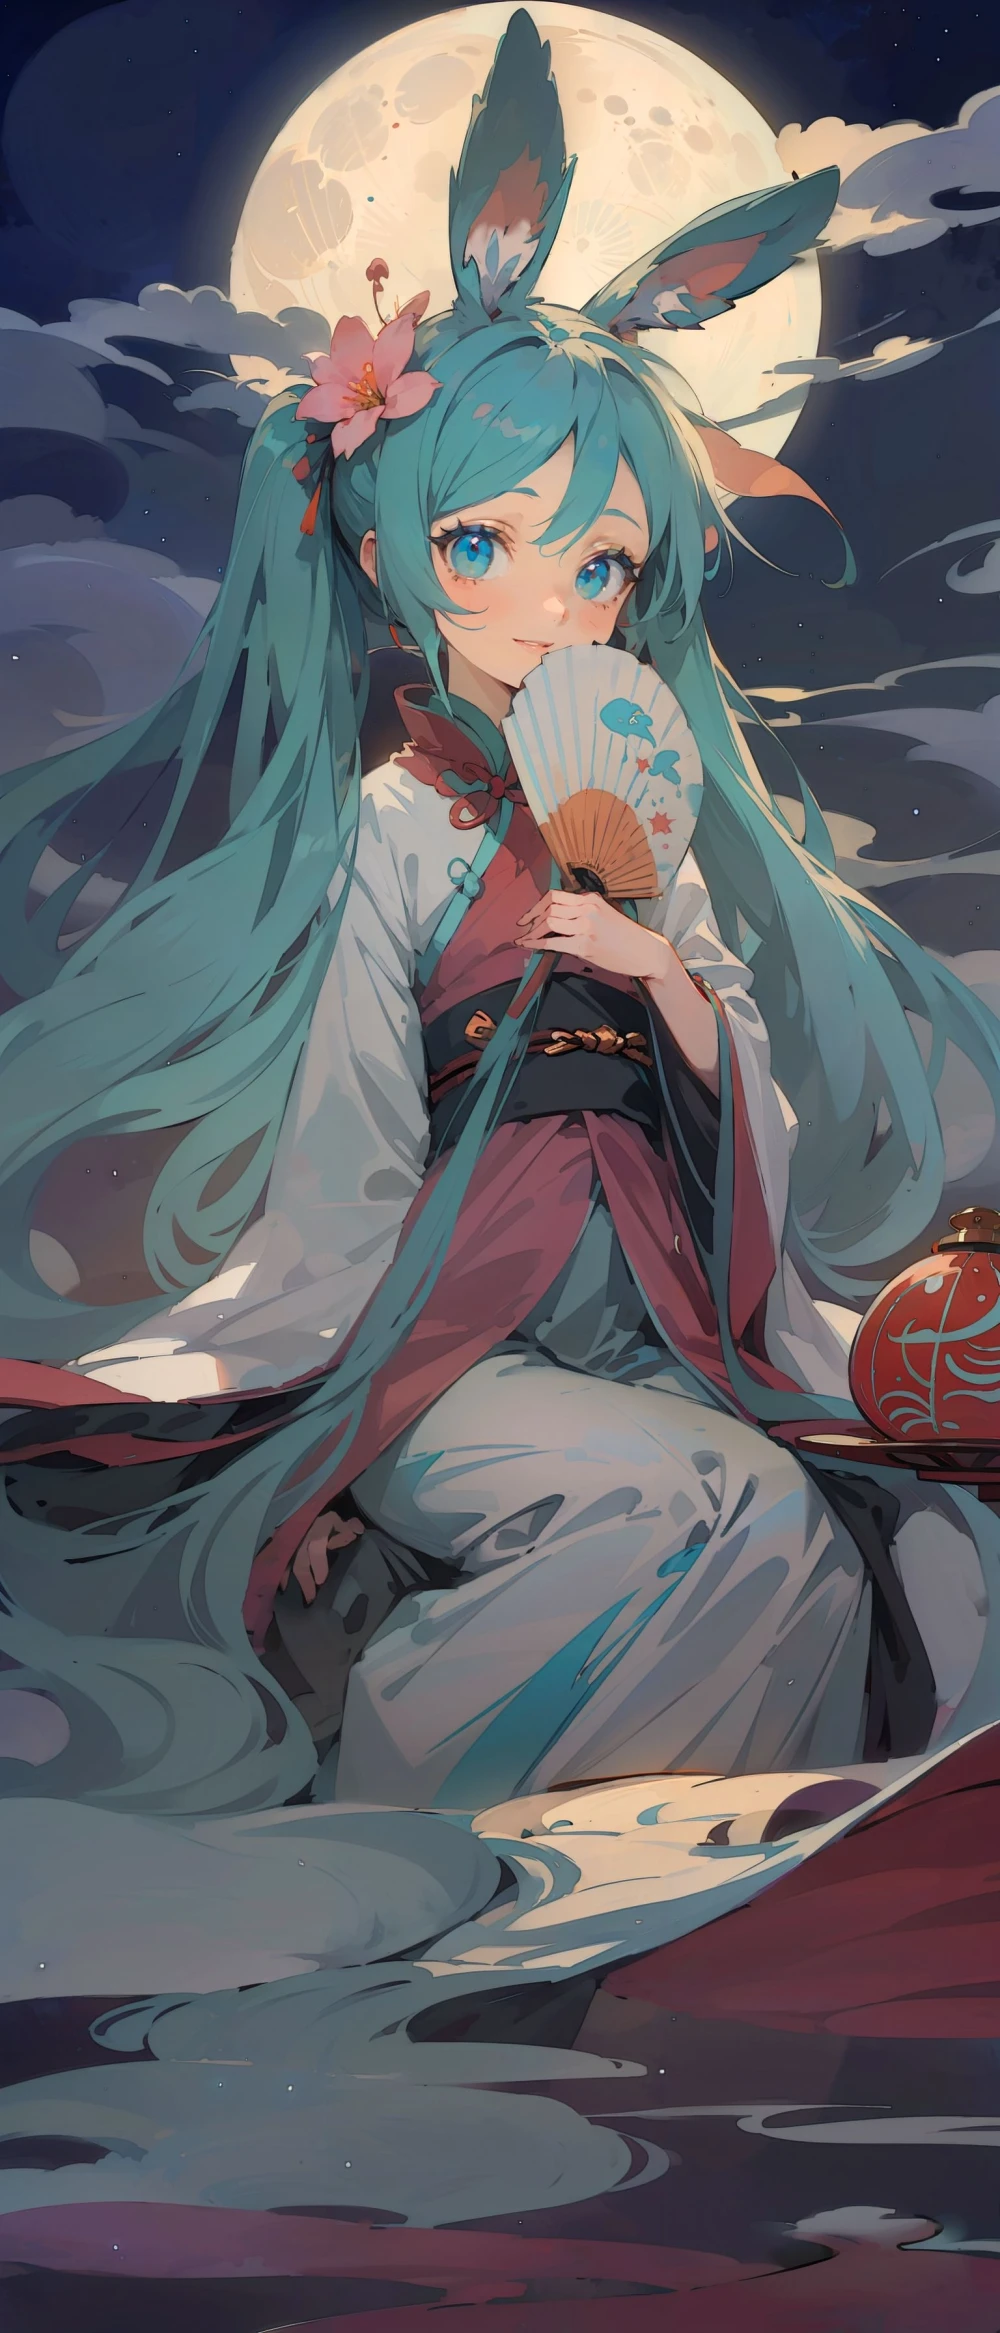 hatsune-miku-anime-style-all-ages-2-44